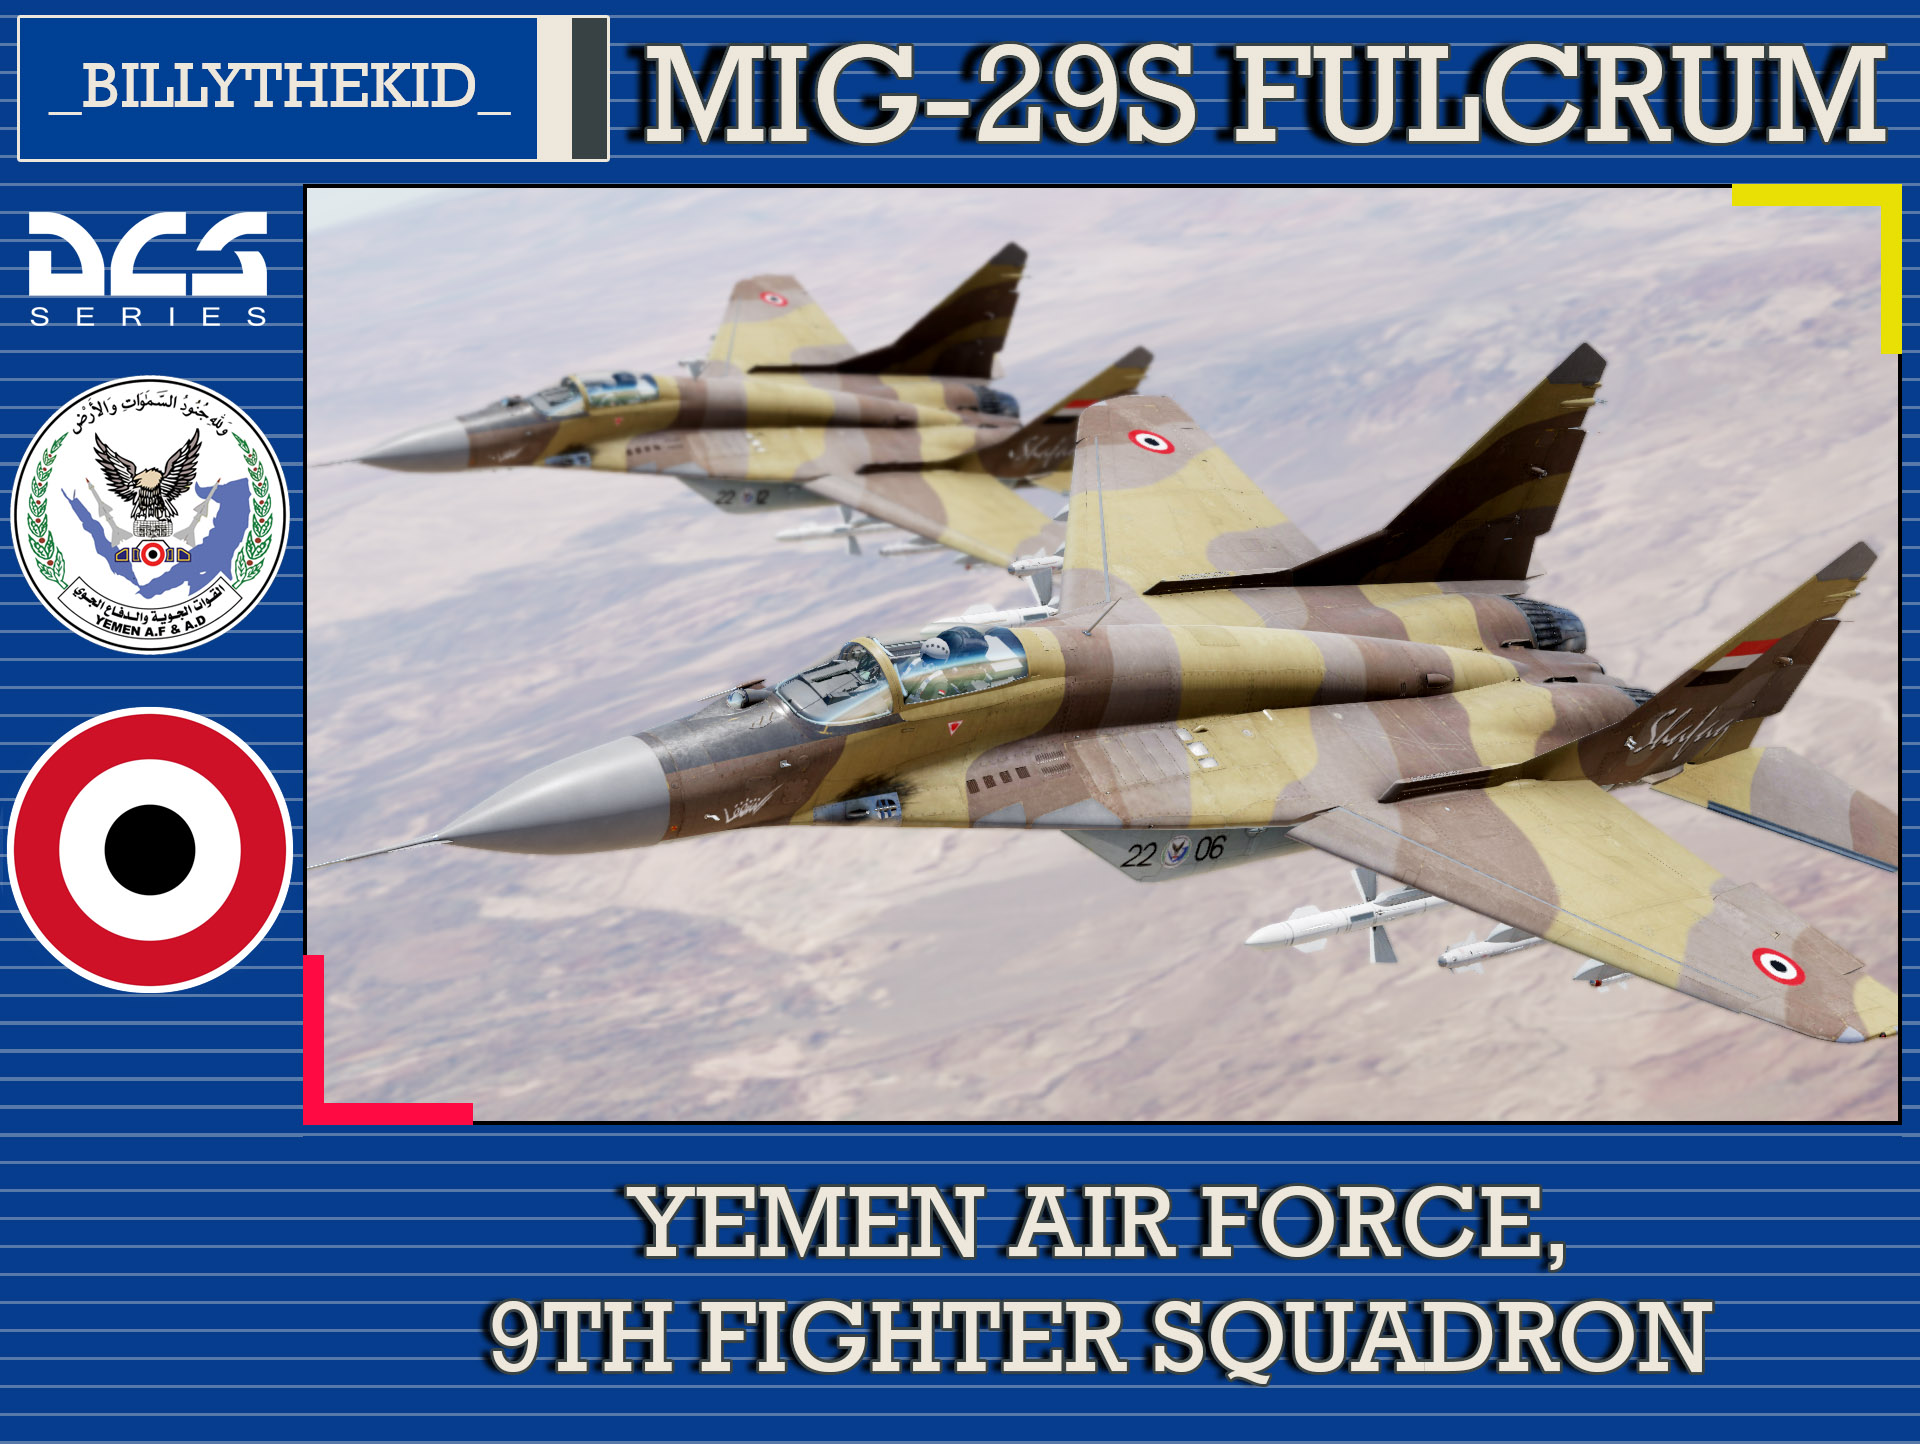 Yemen Air Force - 9th Fighter Squadron MiG-29S Fulcrum